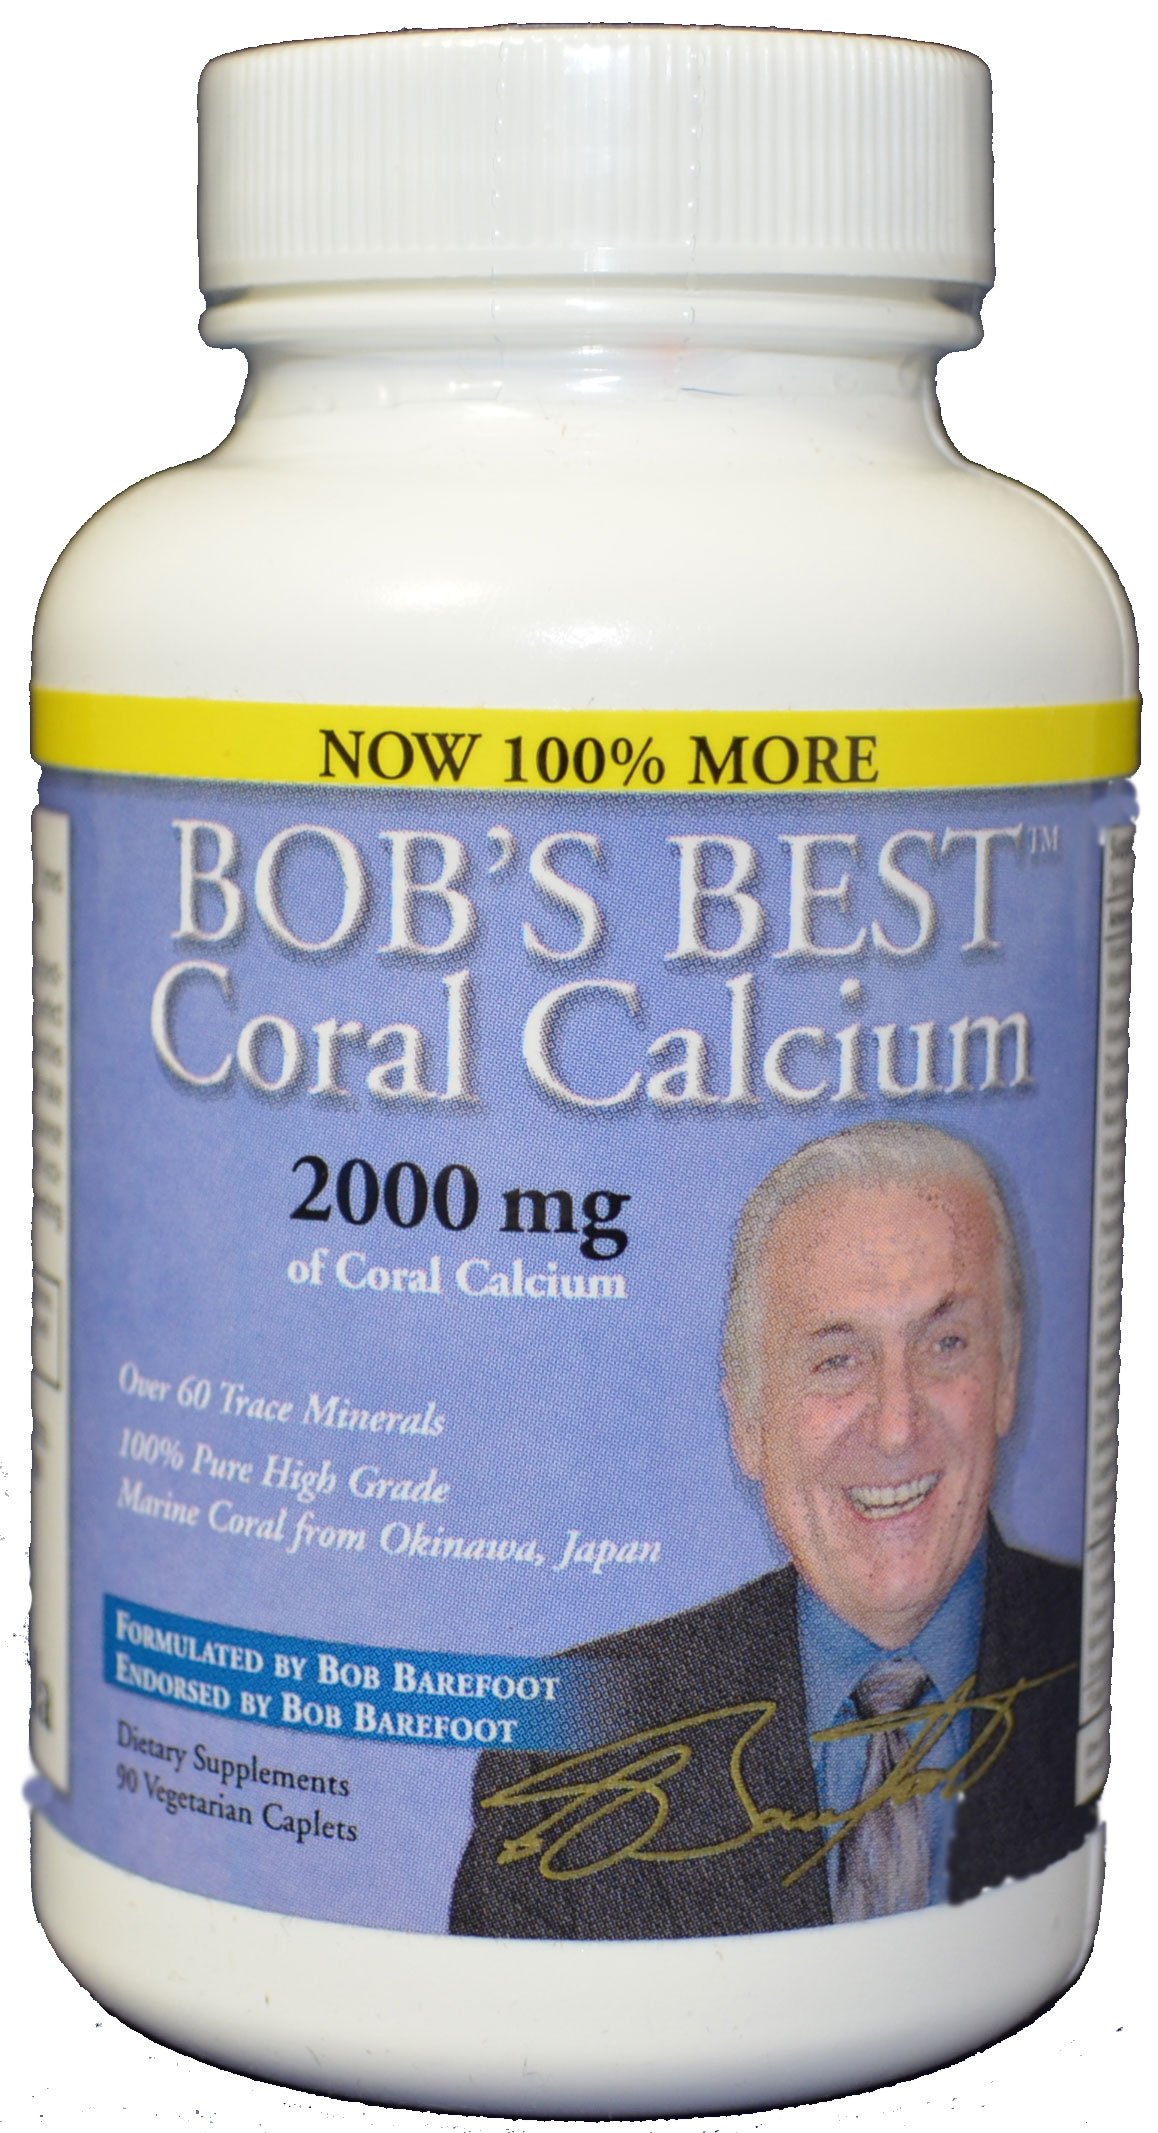 Bob's Best Coral Calcium 2000mg, 3 Pack of 90 Capsules New Improved Formulation!